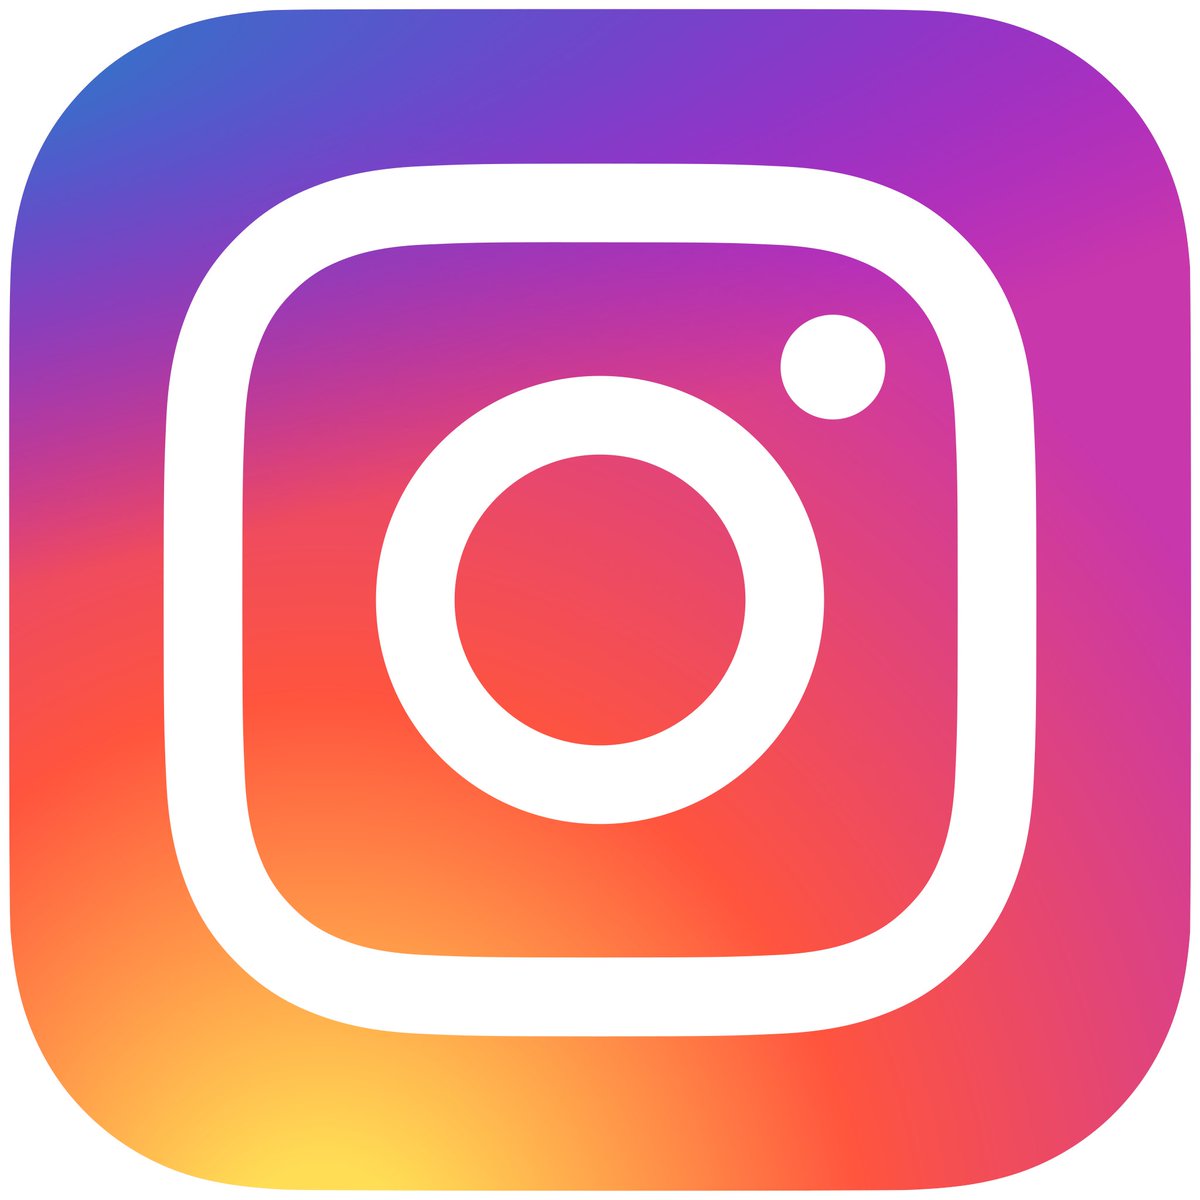 COMING SOON: We're moving to Instagram soon. Same name 'thedellschool'. You'll still be able to follow our updates on our website as you do now. Standby...